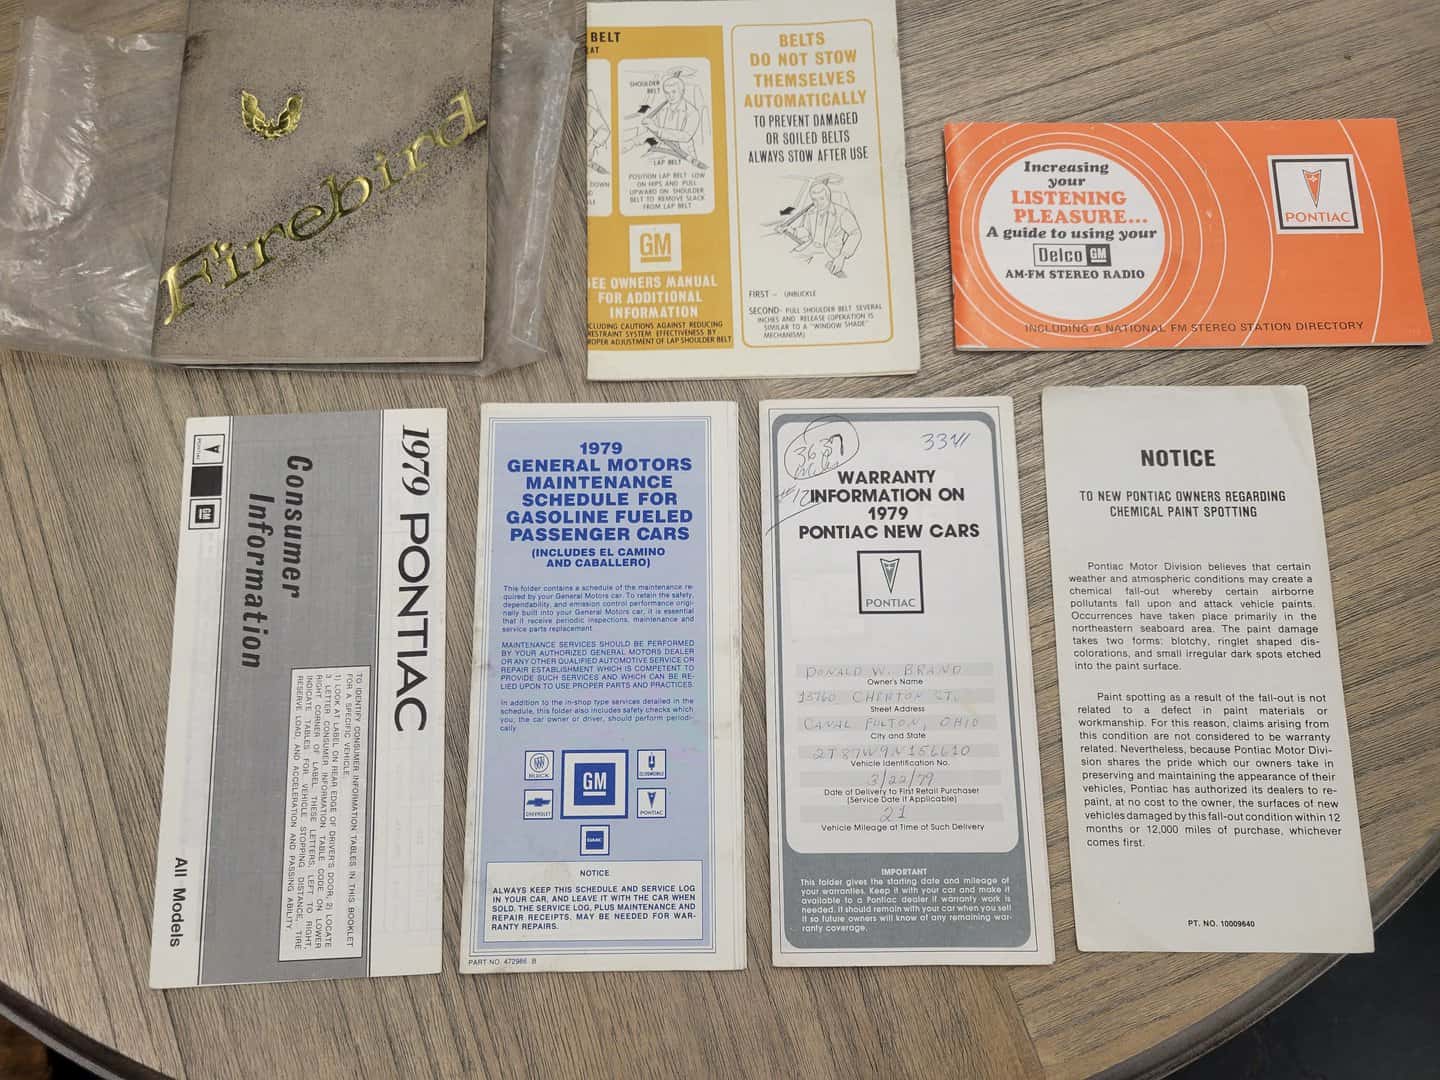 A collection of manuals on a table.